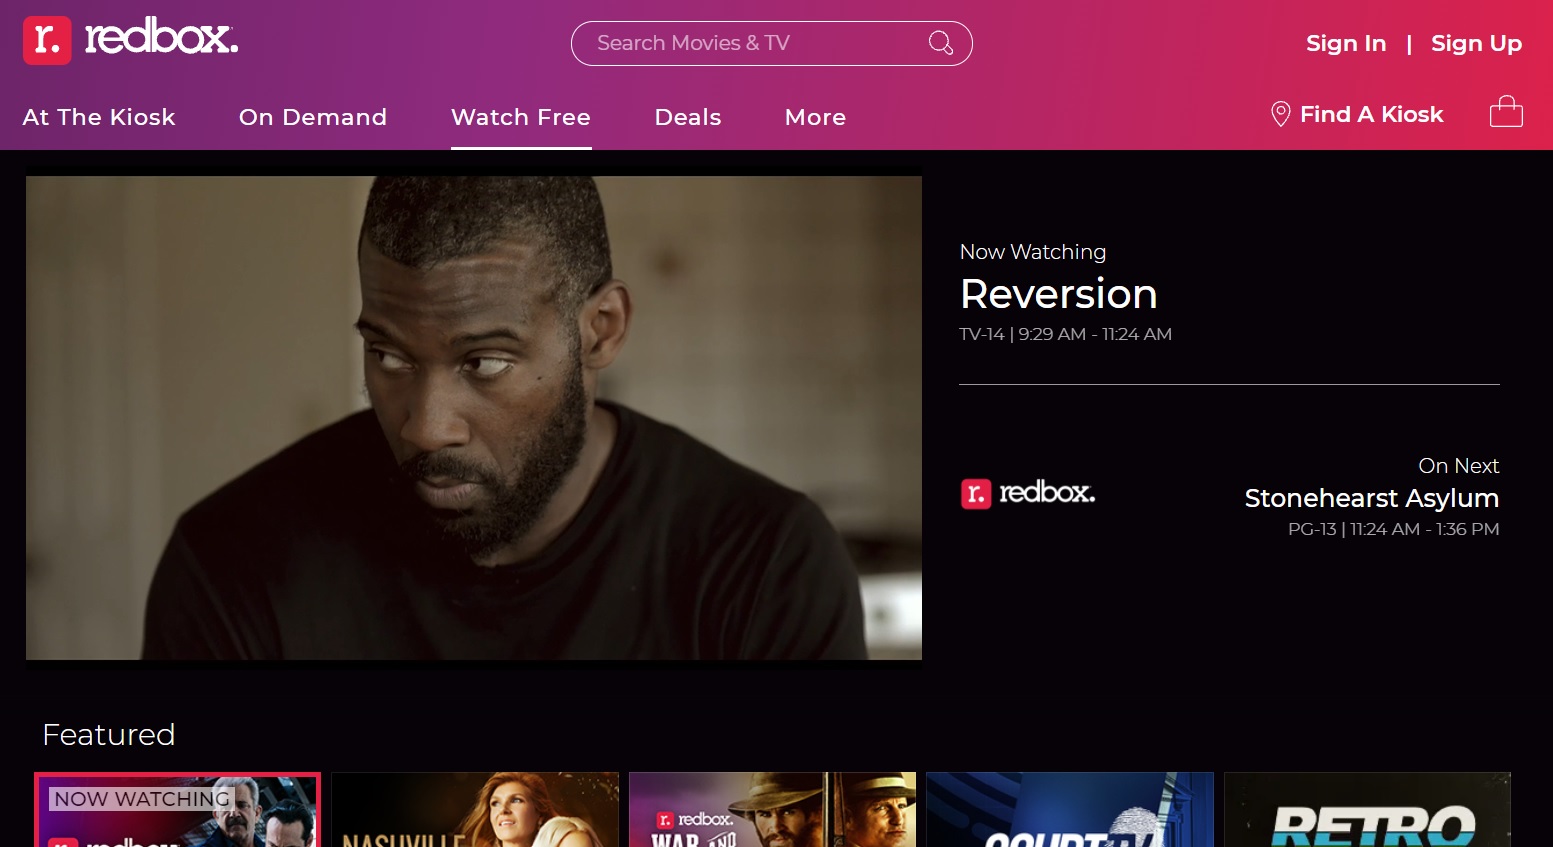 This streaming service adding 24 new live TV channels for free